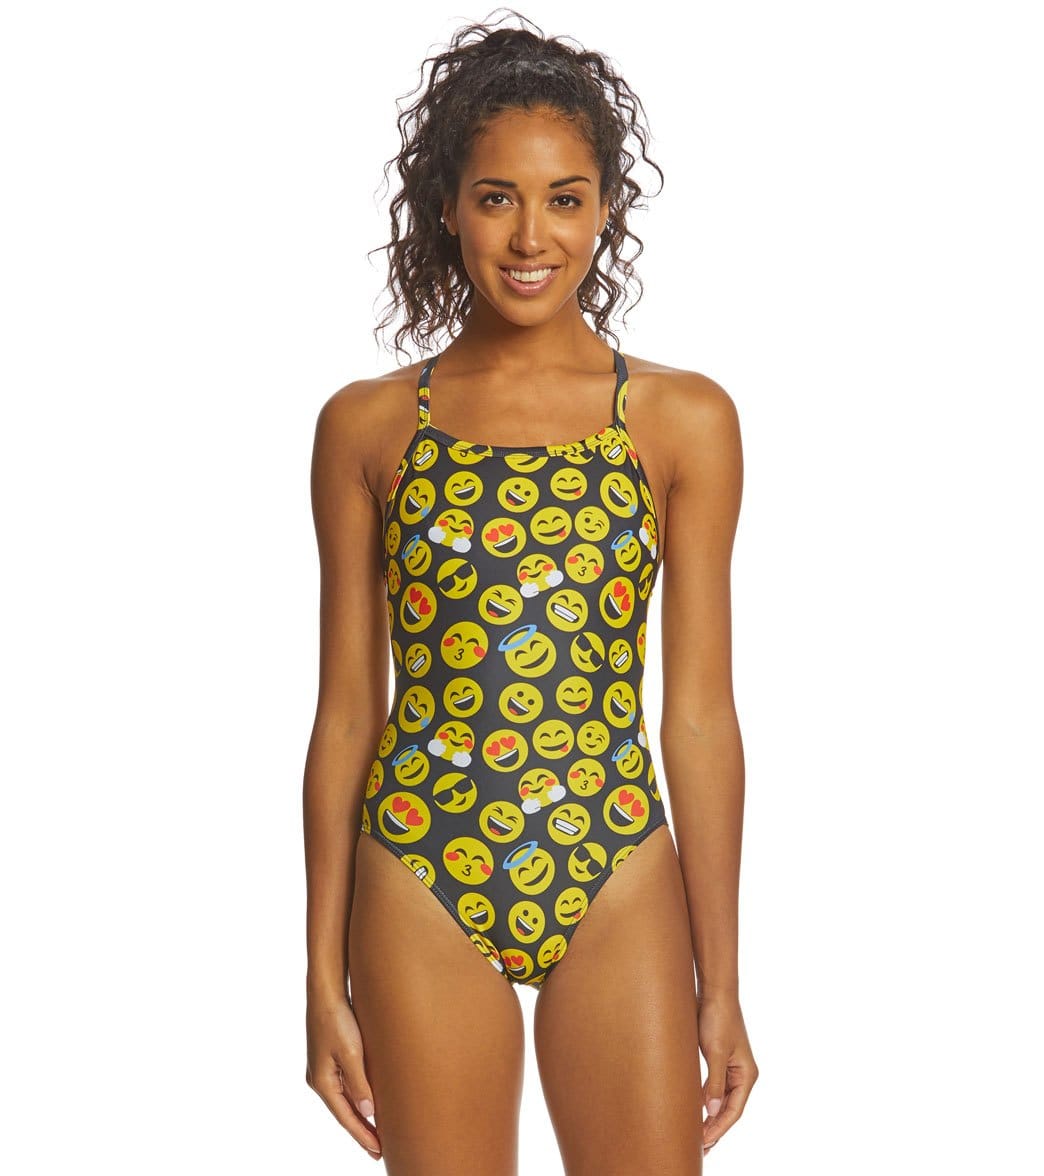 iSwim Emoji Thin Strap One Piece Swimsuit at SwimOutlet.com